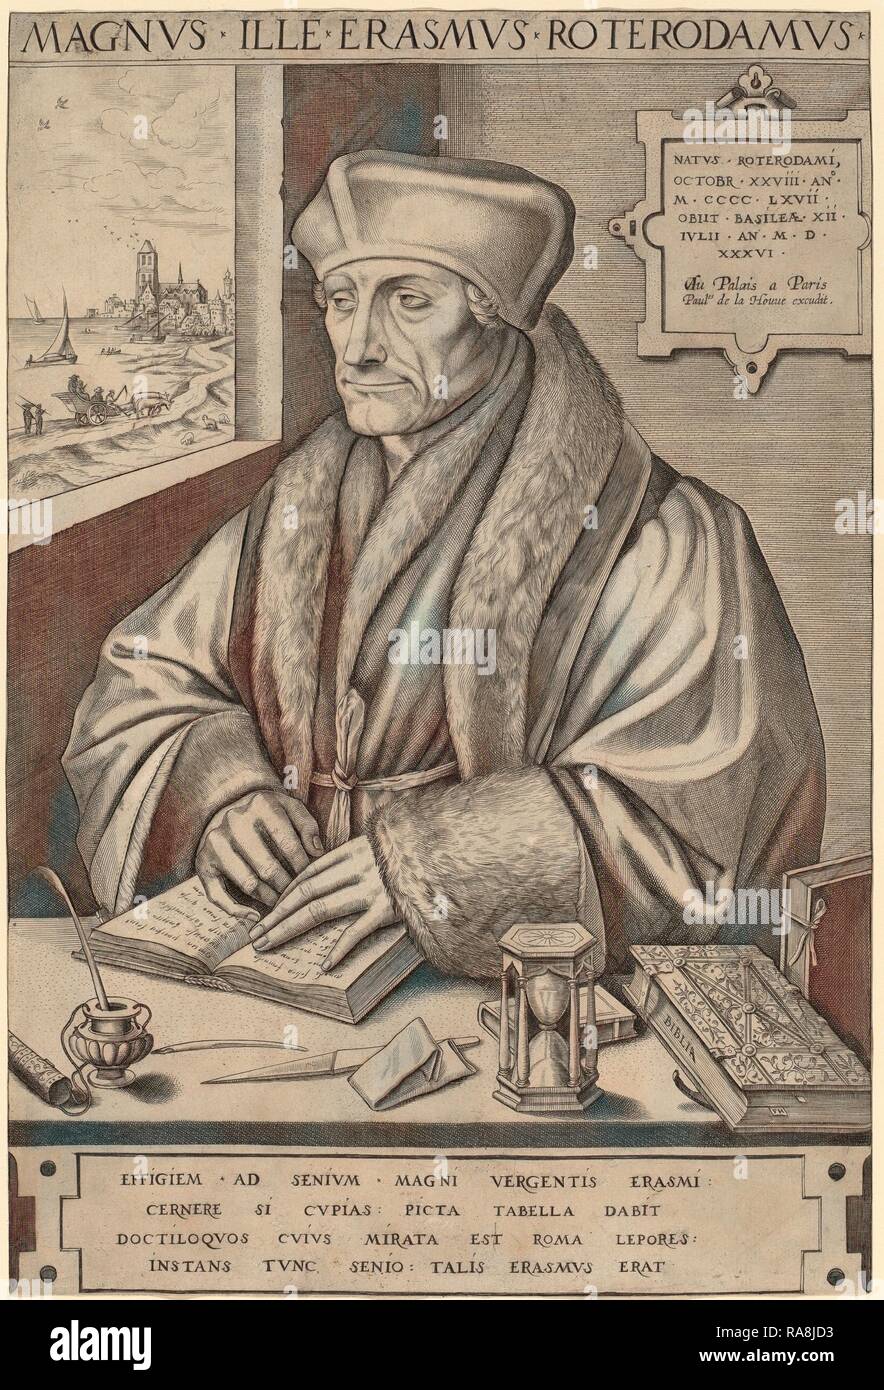 Frans Huys after Hans Holbein the Younger (Flemish, 1522 - 1562), Erasmus of Rotterdam, engraving. Reimagined Stock Photo